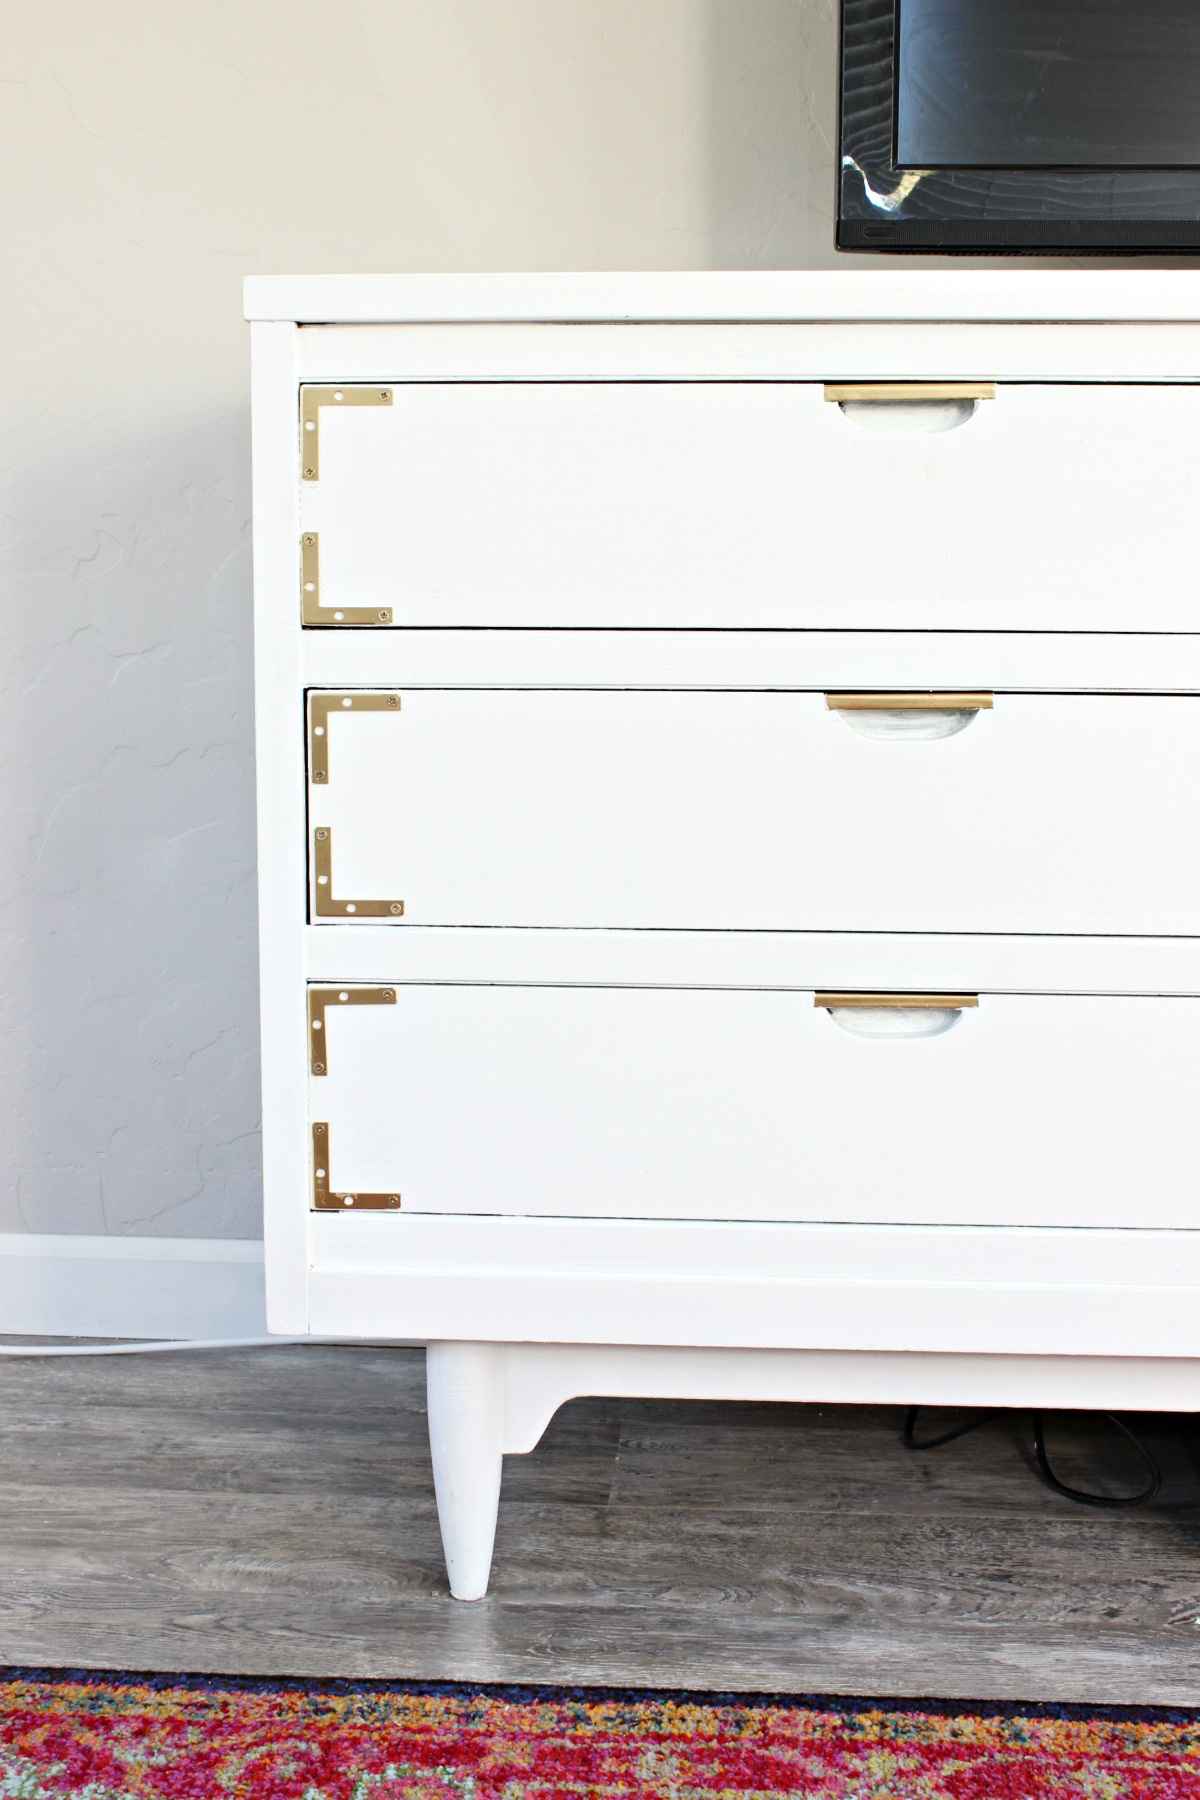 How to paint a dresser - Click for tutorial!